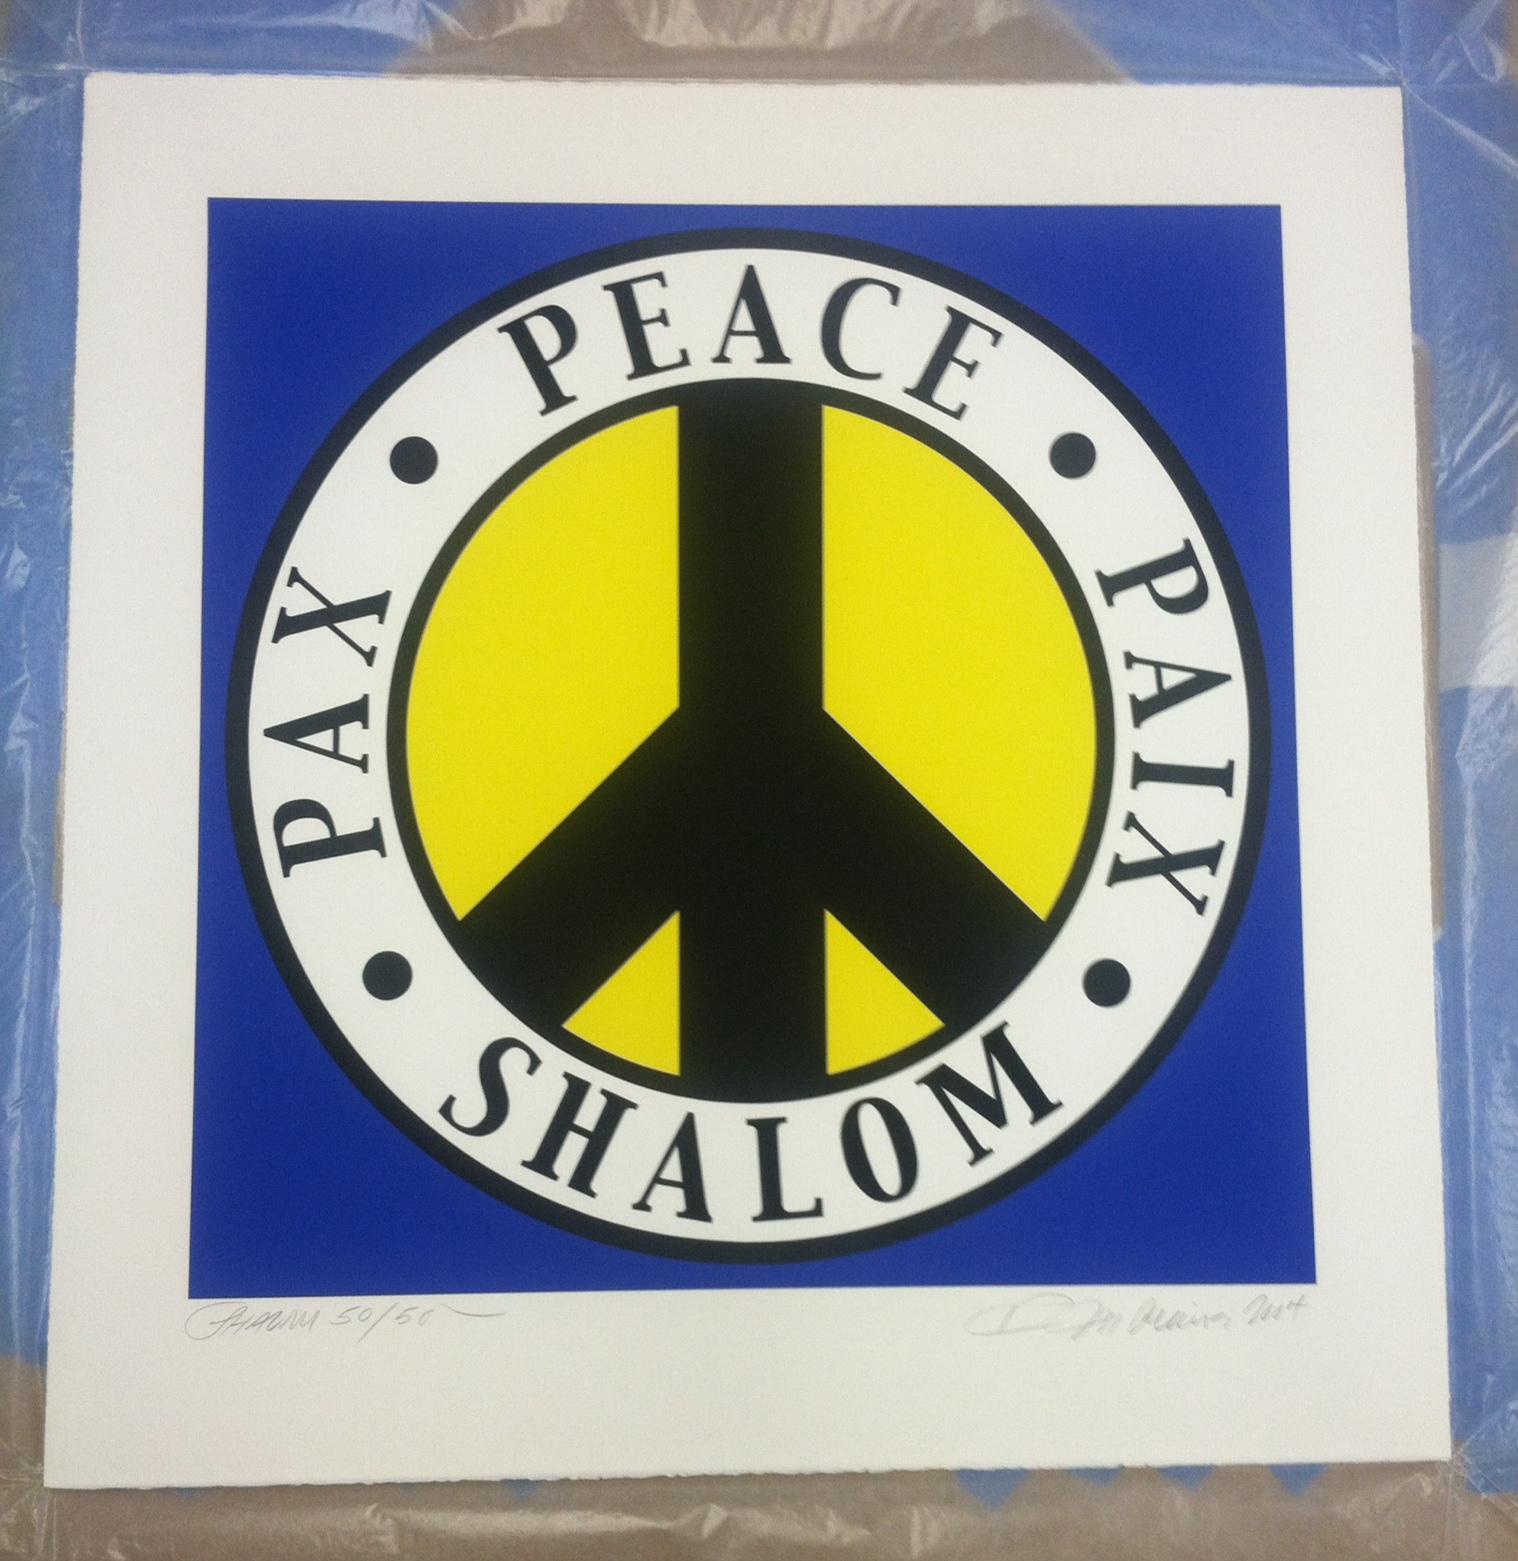 Tel Aviv Peace - Serigraph edition of 50 - Signed by Robert Indiana For Sale 1